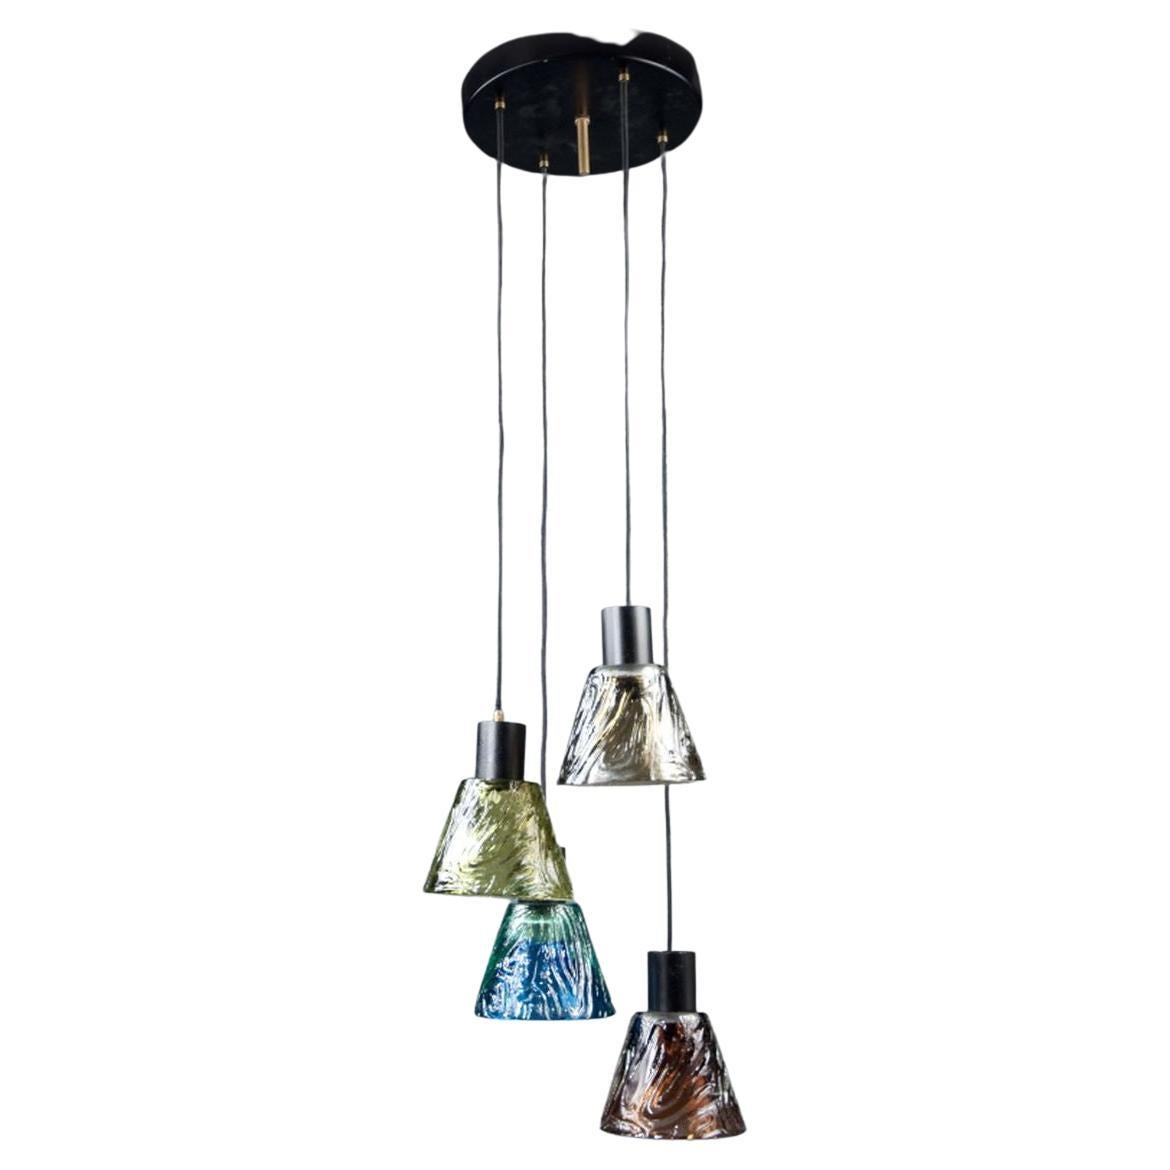 Four handblown, colorful glass shades, conic in shape with textured outer walls, suspended from round ceiling plate.


